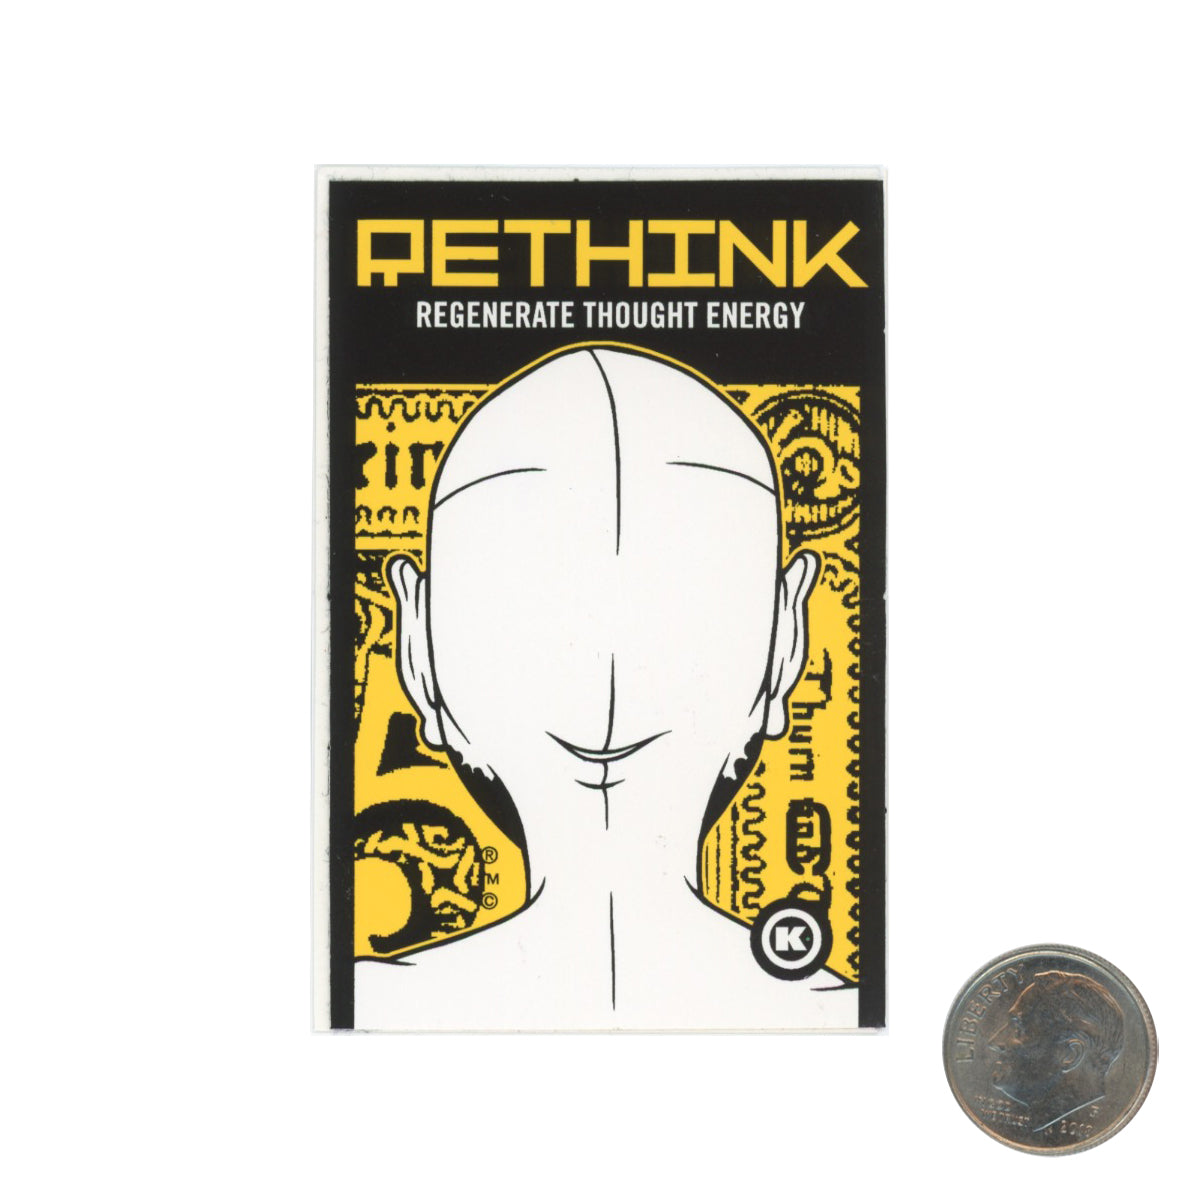 Dave Kinsey RETHINK Regenerate Thought Energy Yellow Black Sticker with dime